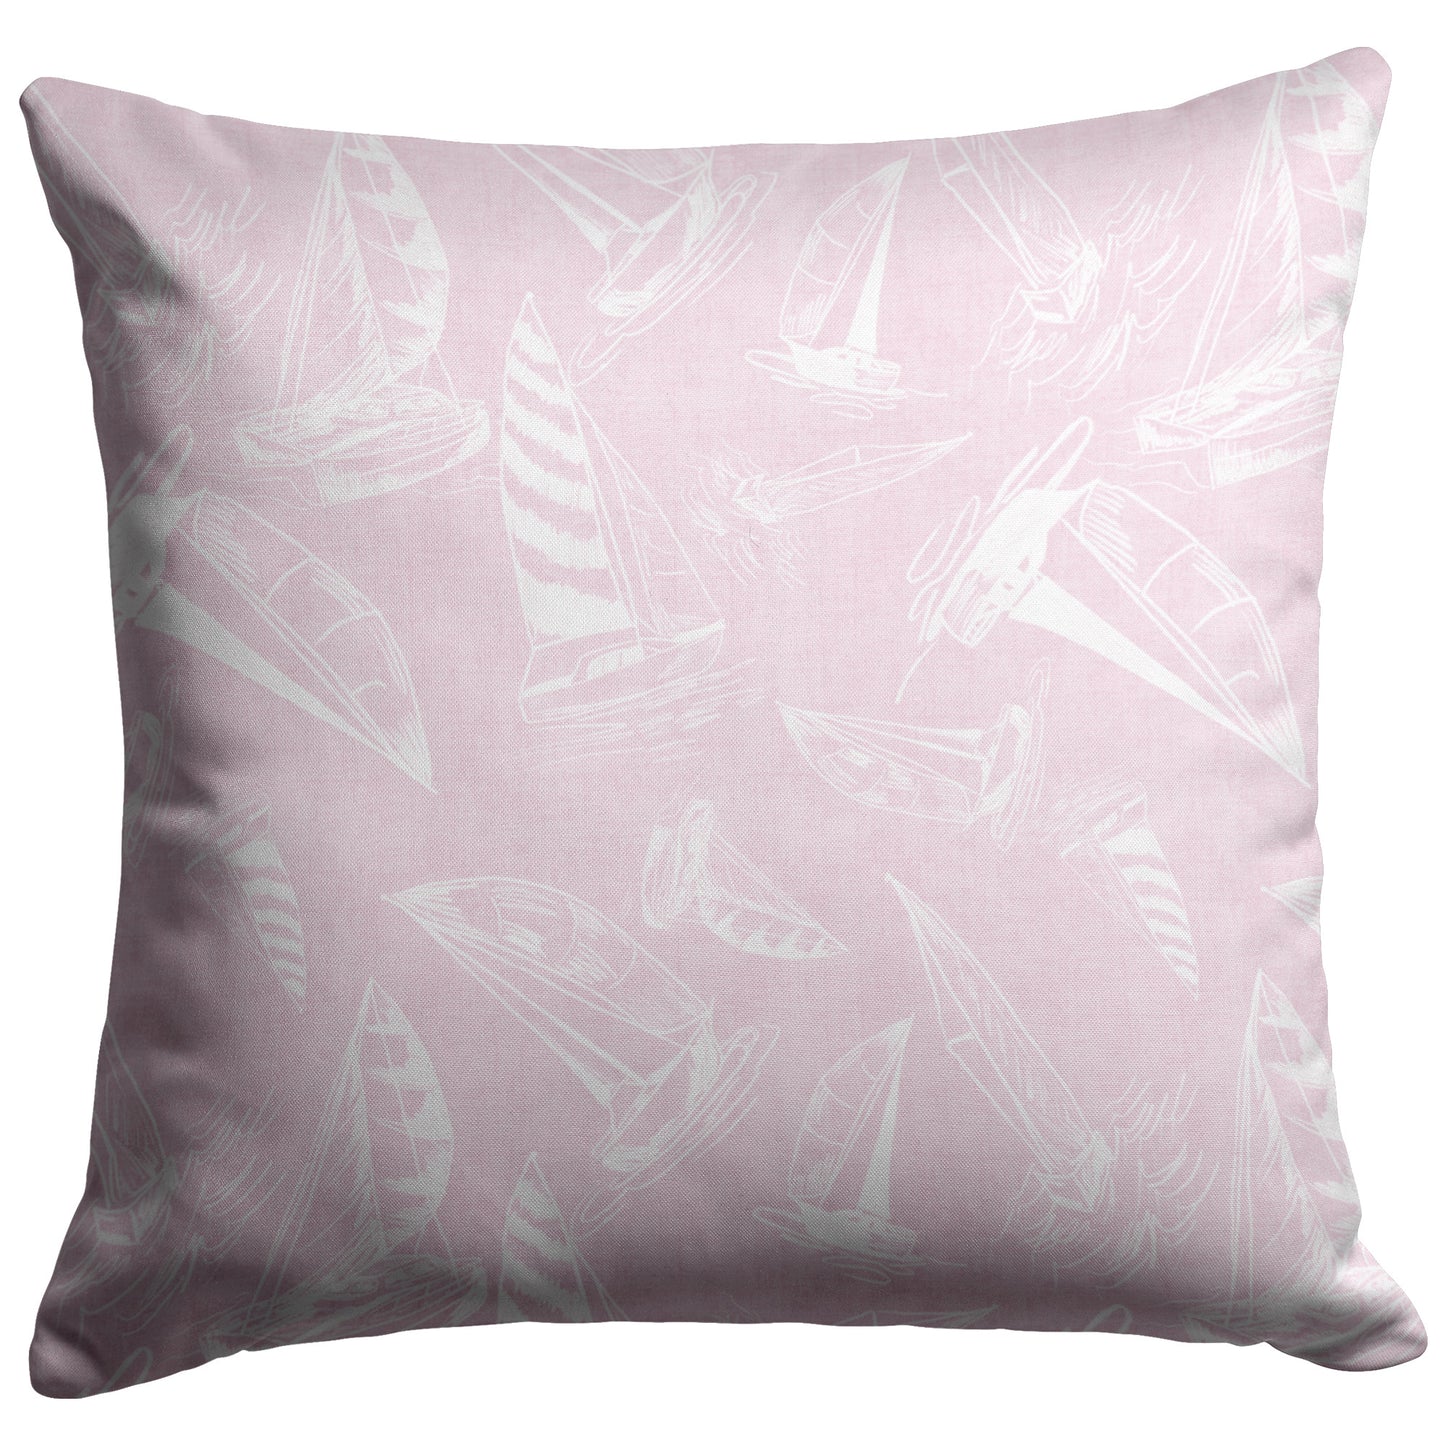 Sailboat Sketches on Pink Linen Textured Background, Throw Pillow